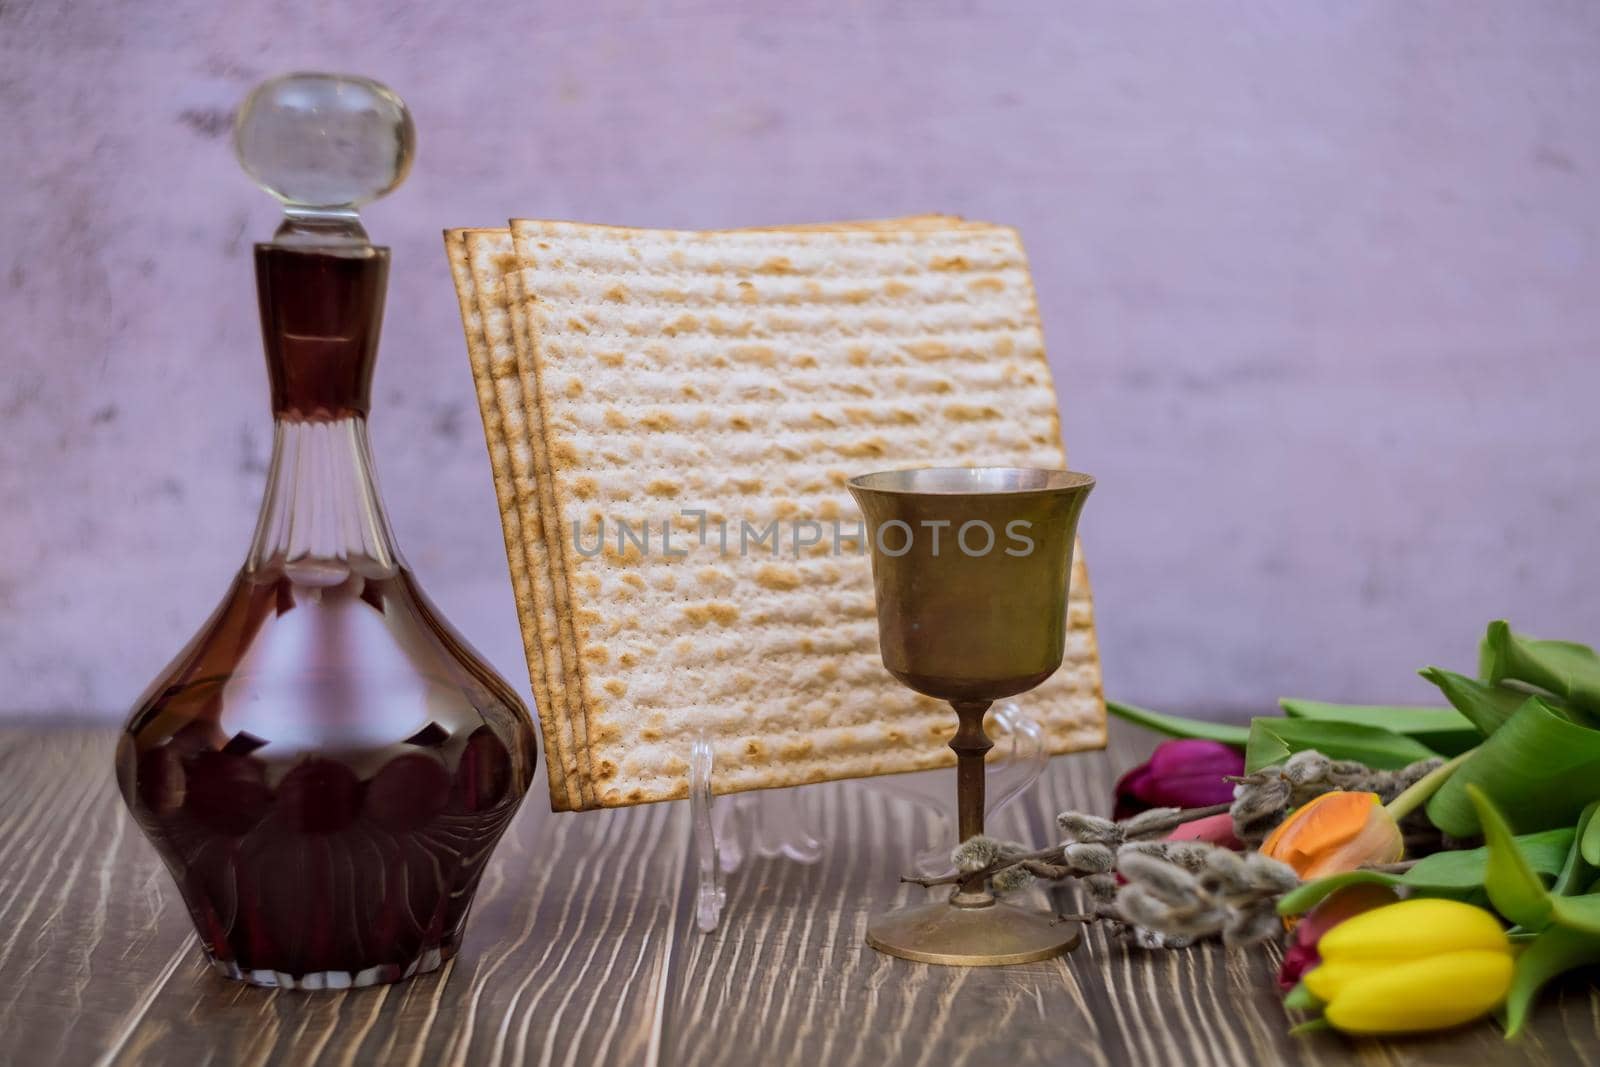 Blessings Pesach Jewish traditional holiday on Passover celebration of kosher wine cup and matzah bread the ceremony ritual